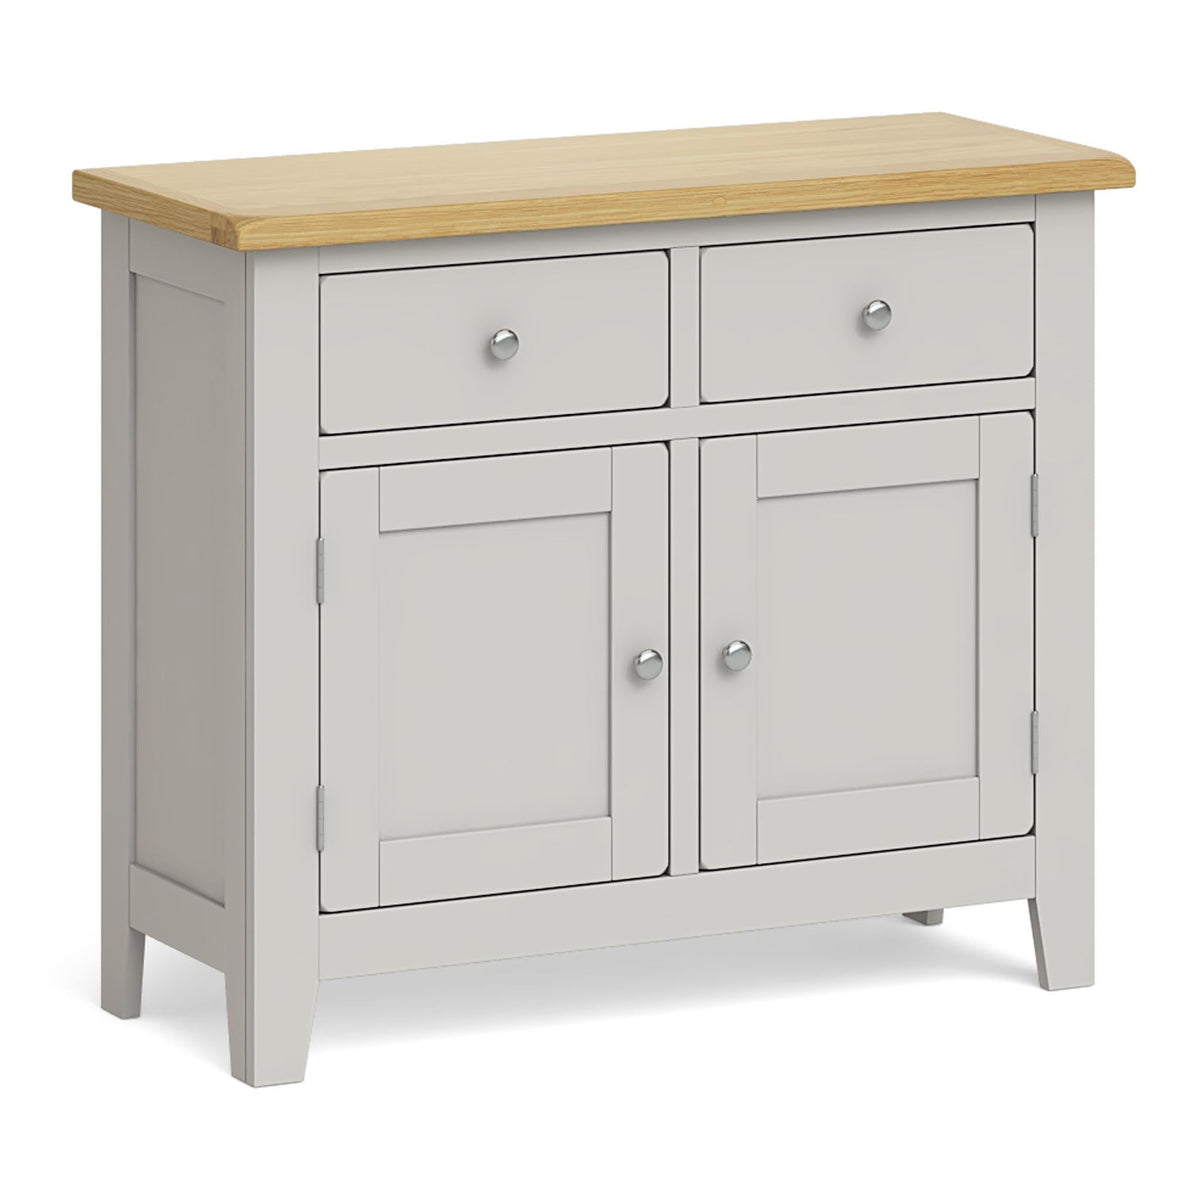 Lundy Grey Small 2 Door Sideboard by Roseland Furniture